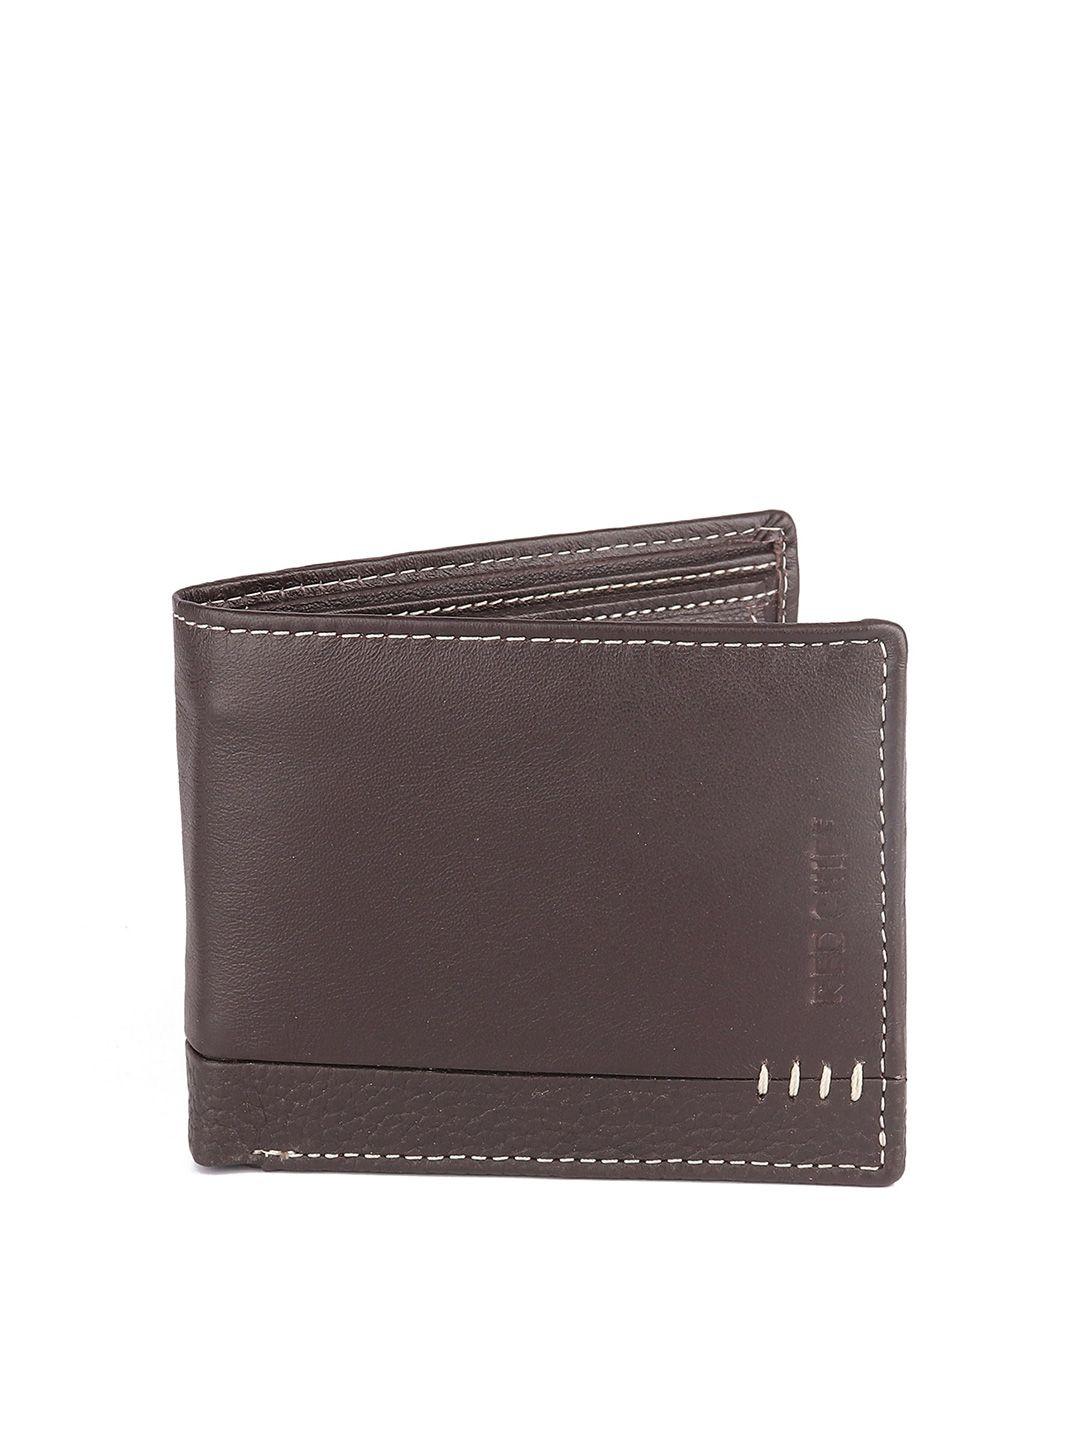 red chief men leather two fold wallet